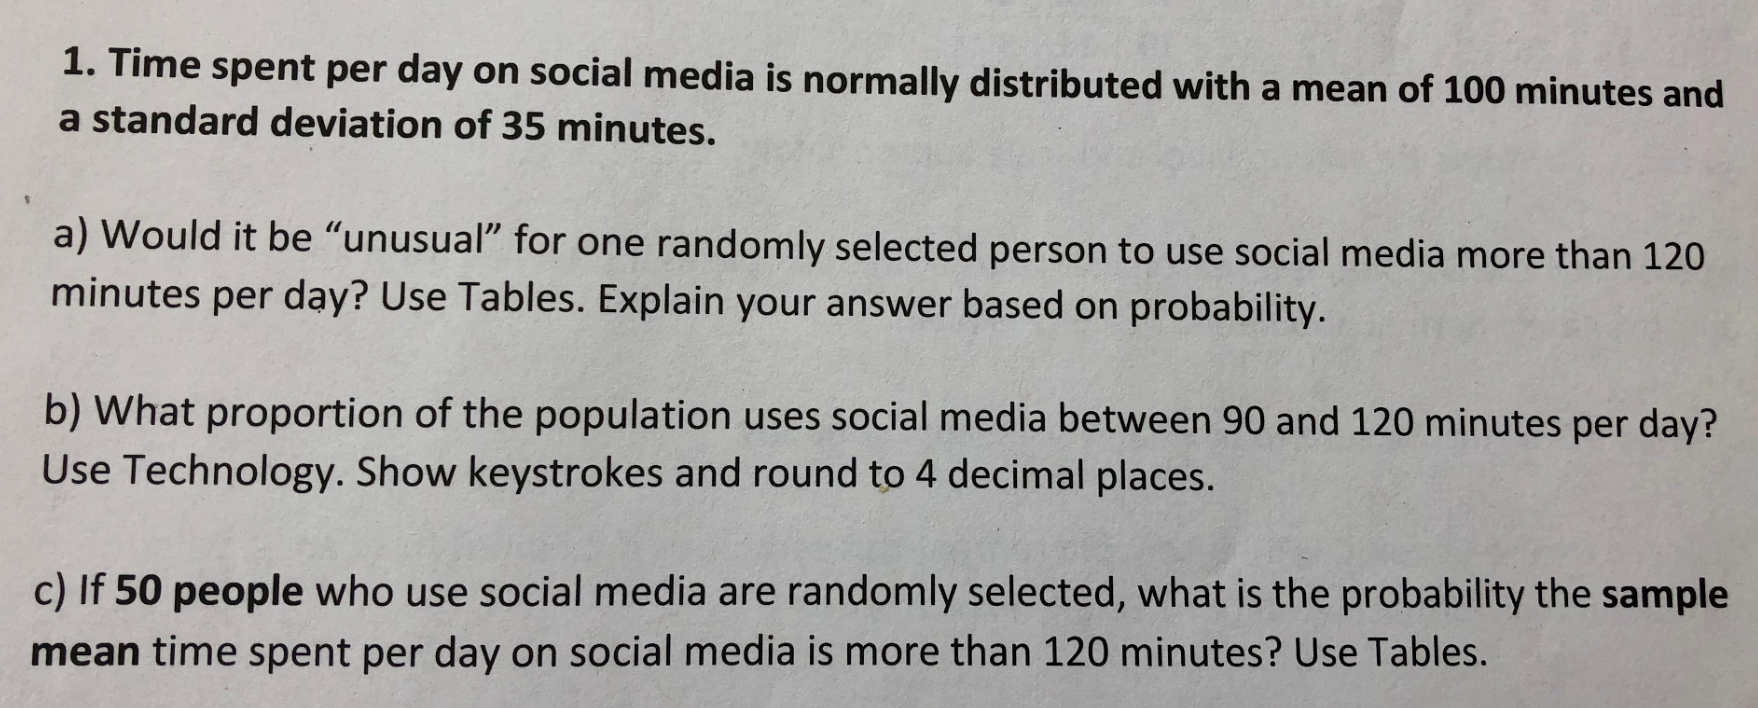 1.
Time spent per day on social media is normally distributed with a mean of 100 minutes and
a standard deviation of 35 minutes.
a) Would it be "unusual" for one randomly selected person to use social media more than 120
minutes per day? Use Tables. Explain your answer based on probability.
b) What proportion of the population uses social media between 90 and 120 minutes per day?
Use Technology. Show keystrokes and round to 4 decimal places.
c) If 50 people who use social media are randomly selected, what is the probability the sample
mean time spent per day on social media is more than 120 minutes? Use Tables.
